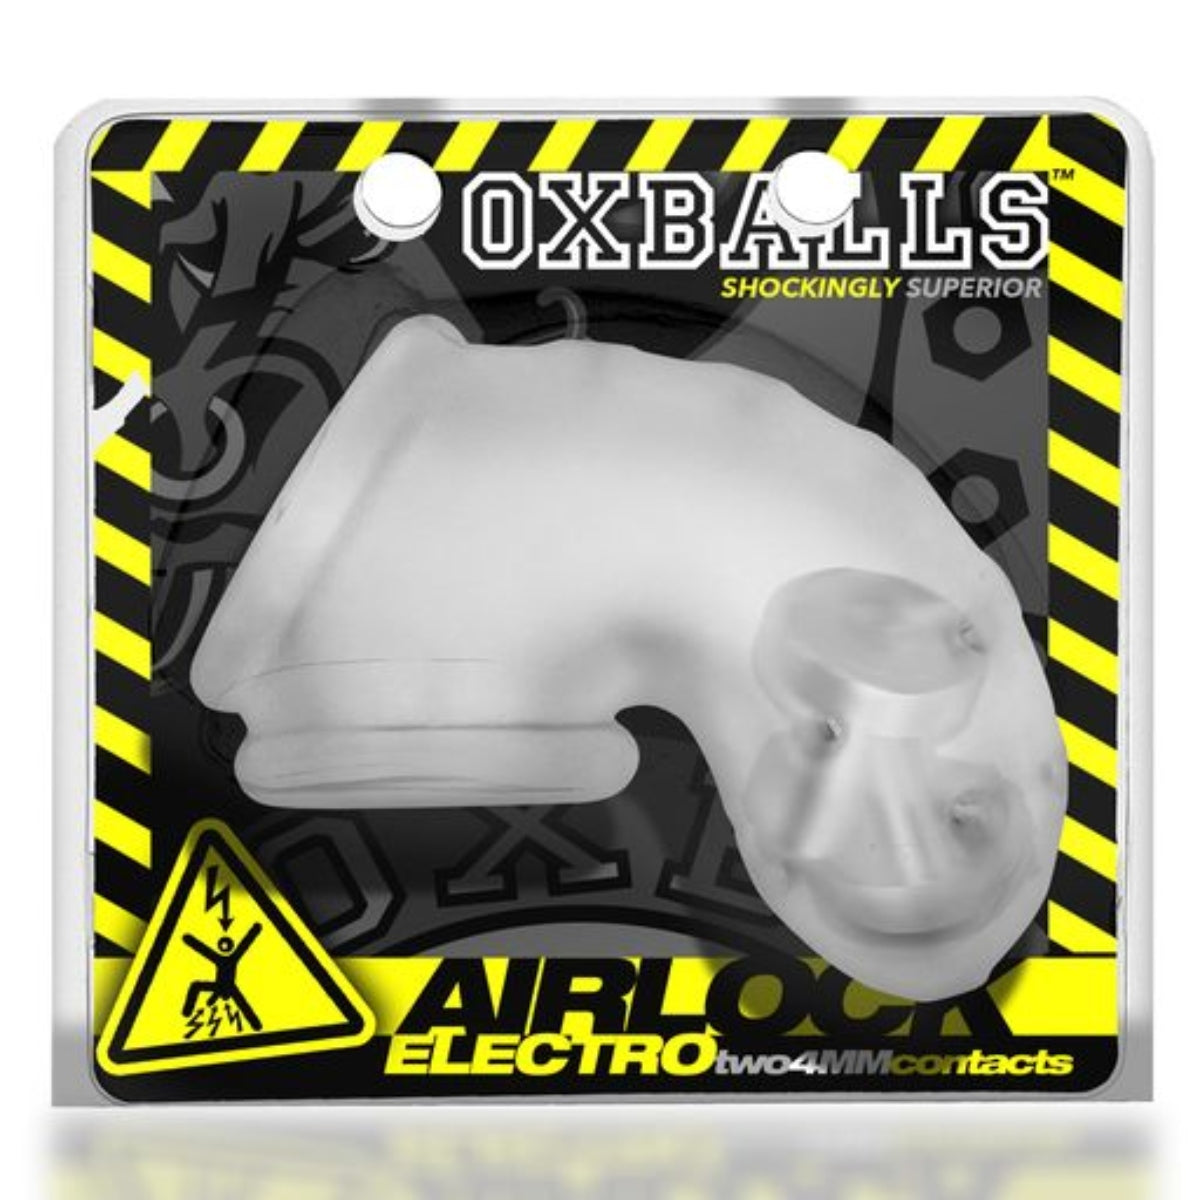 Oxballs Airlock Electro Air-Lite Vented Chastity Cock Cage Clear Ice (8133024252143)